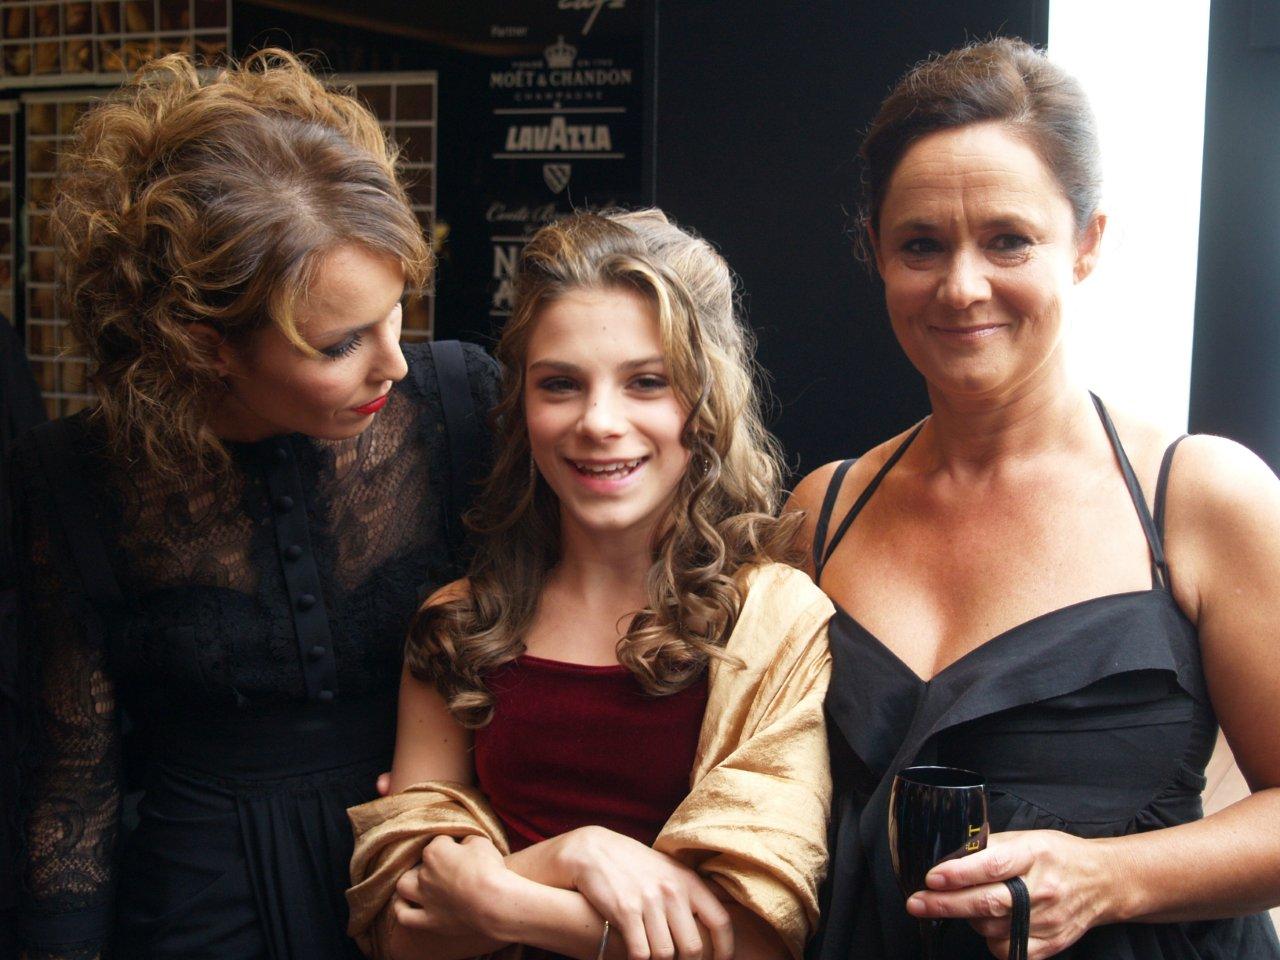 Noomi, Tehilla and Pernilla at the premiere of Beyond in Venice